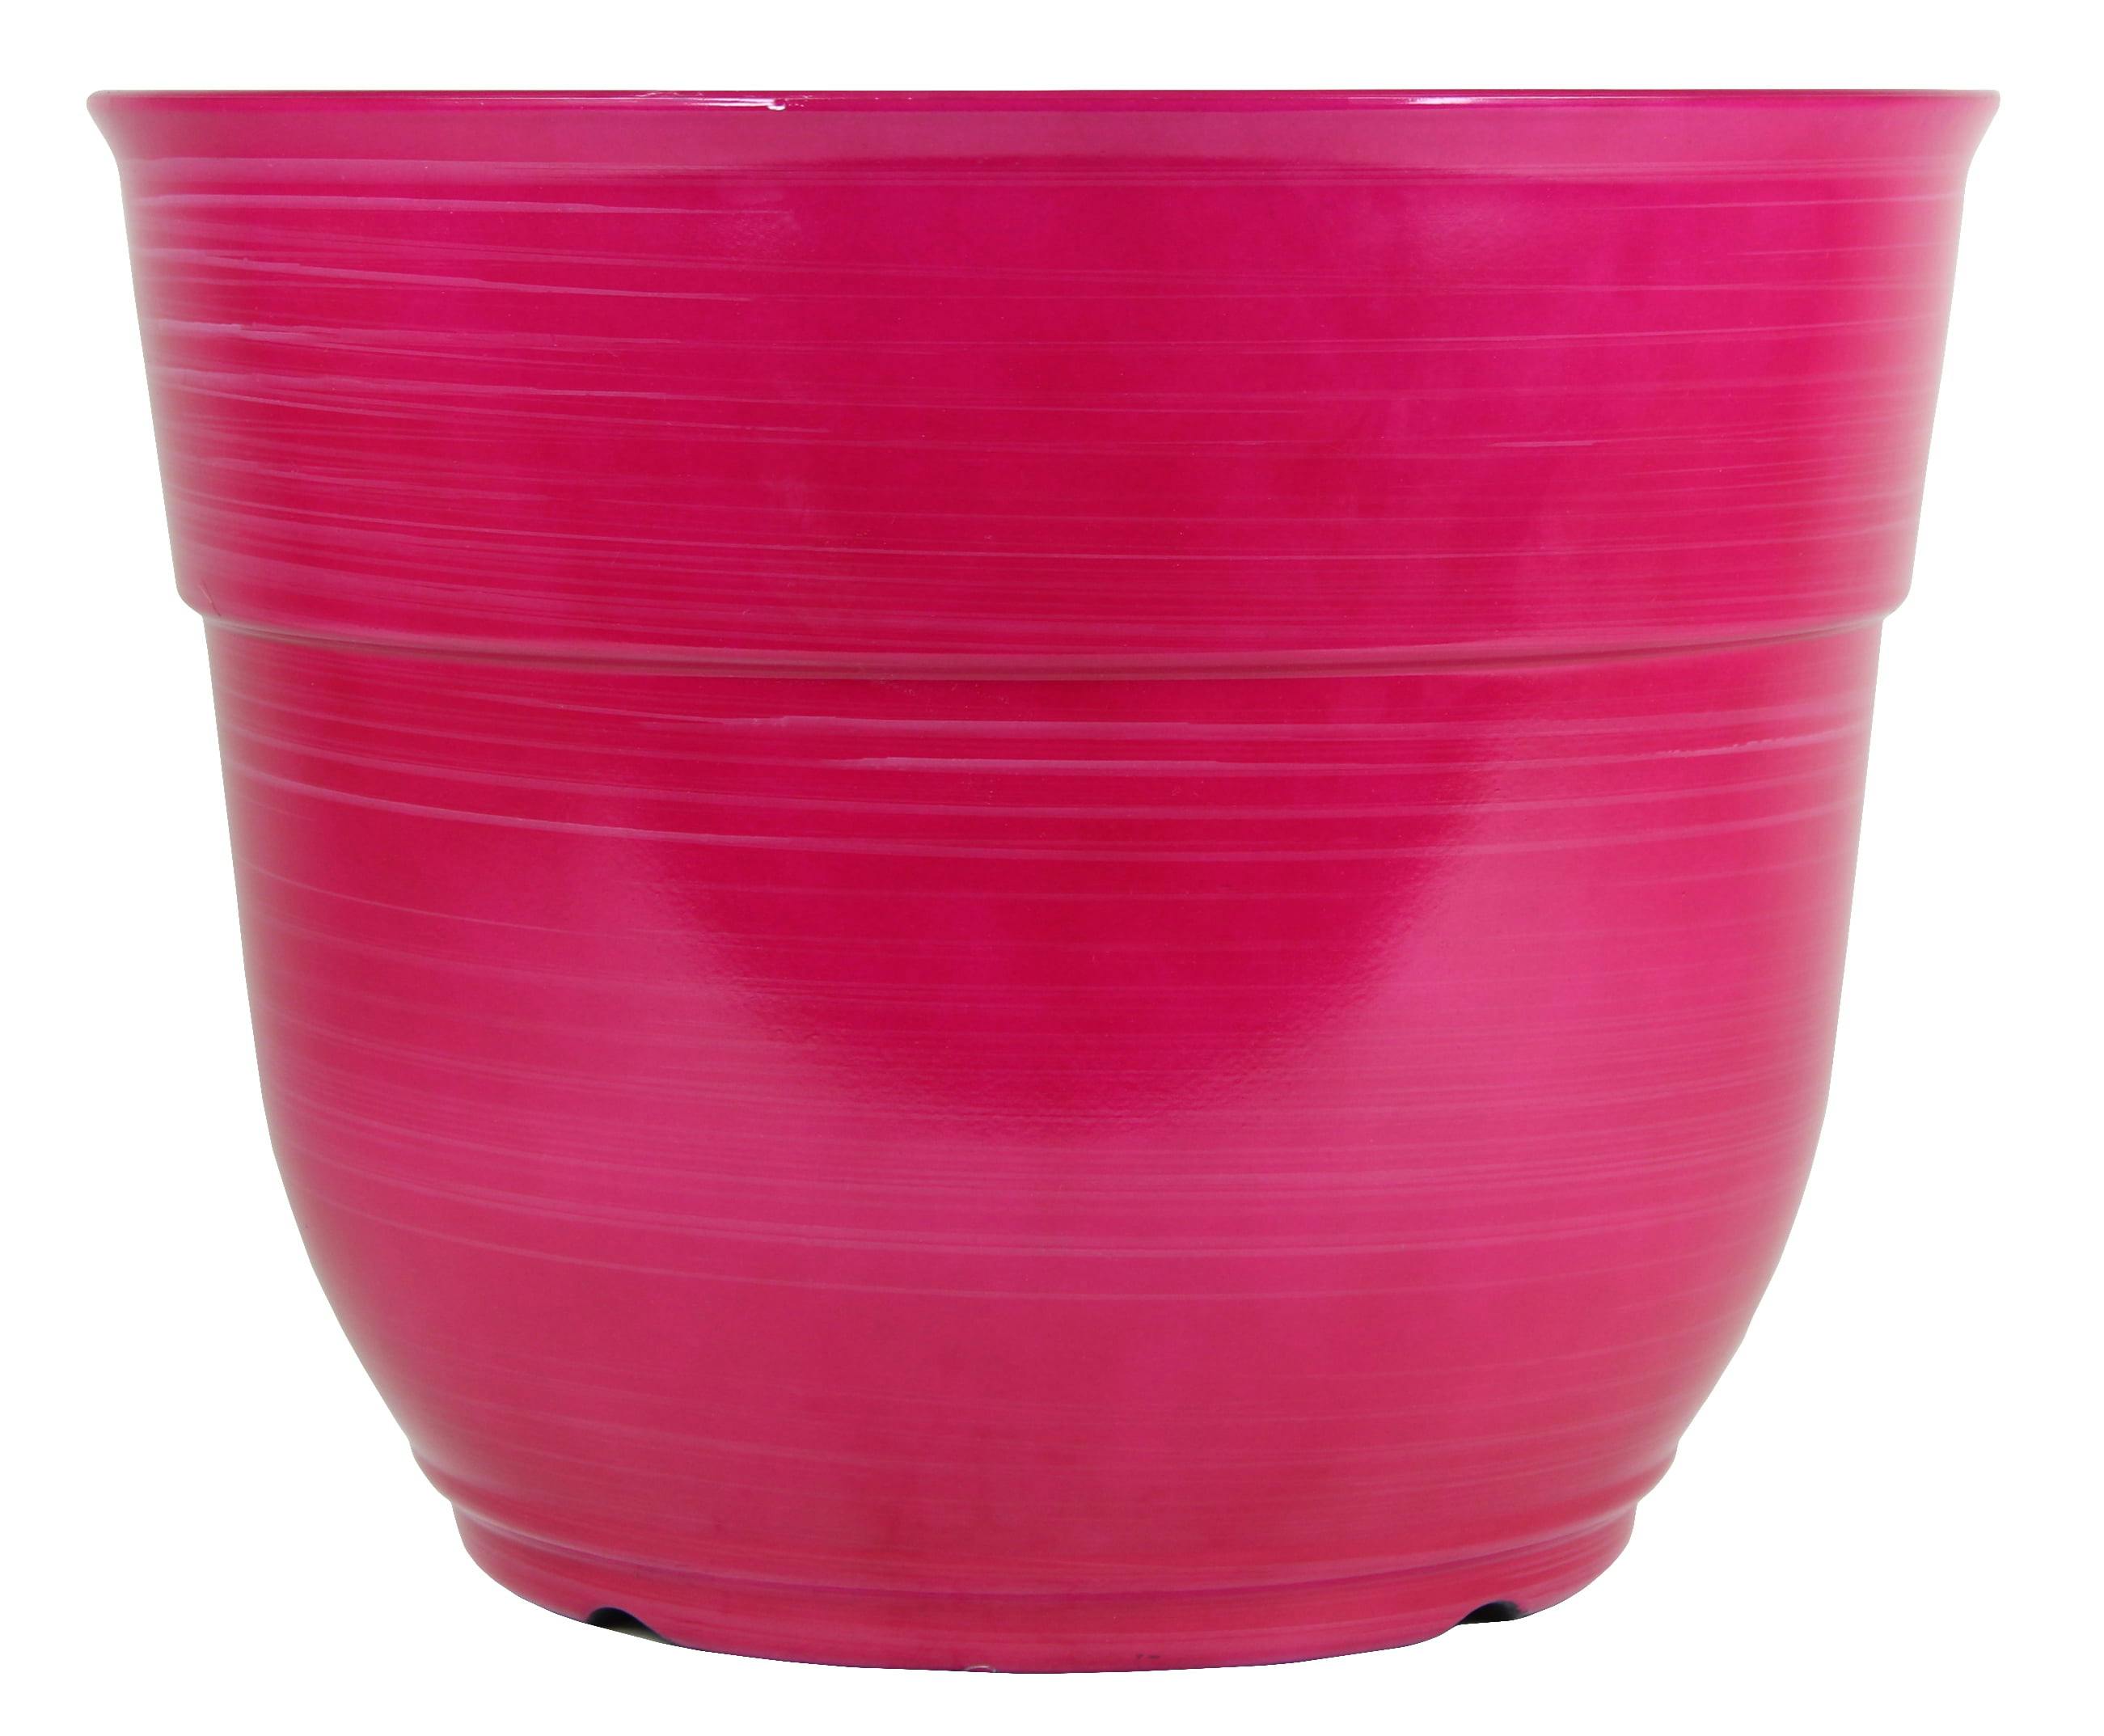 Bright Pink Modern Indoor/Outdoor 15" Plastic Planter with Drainage